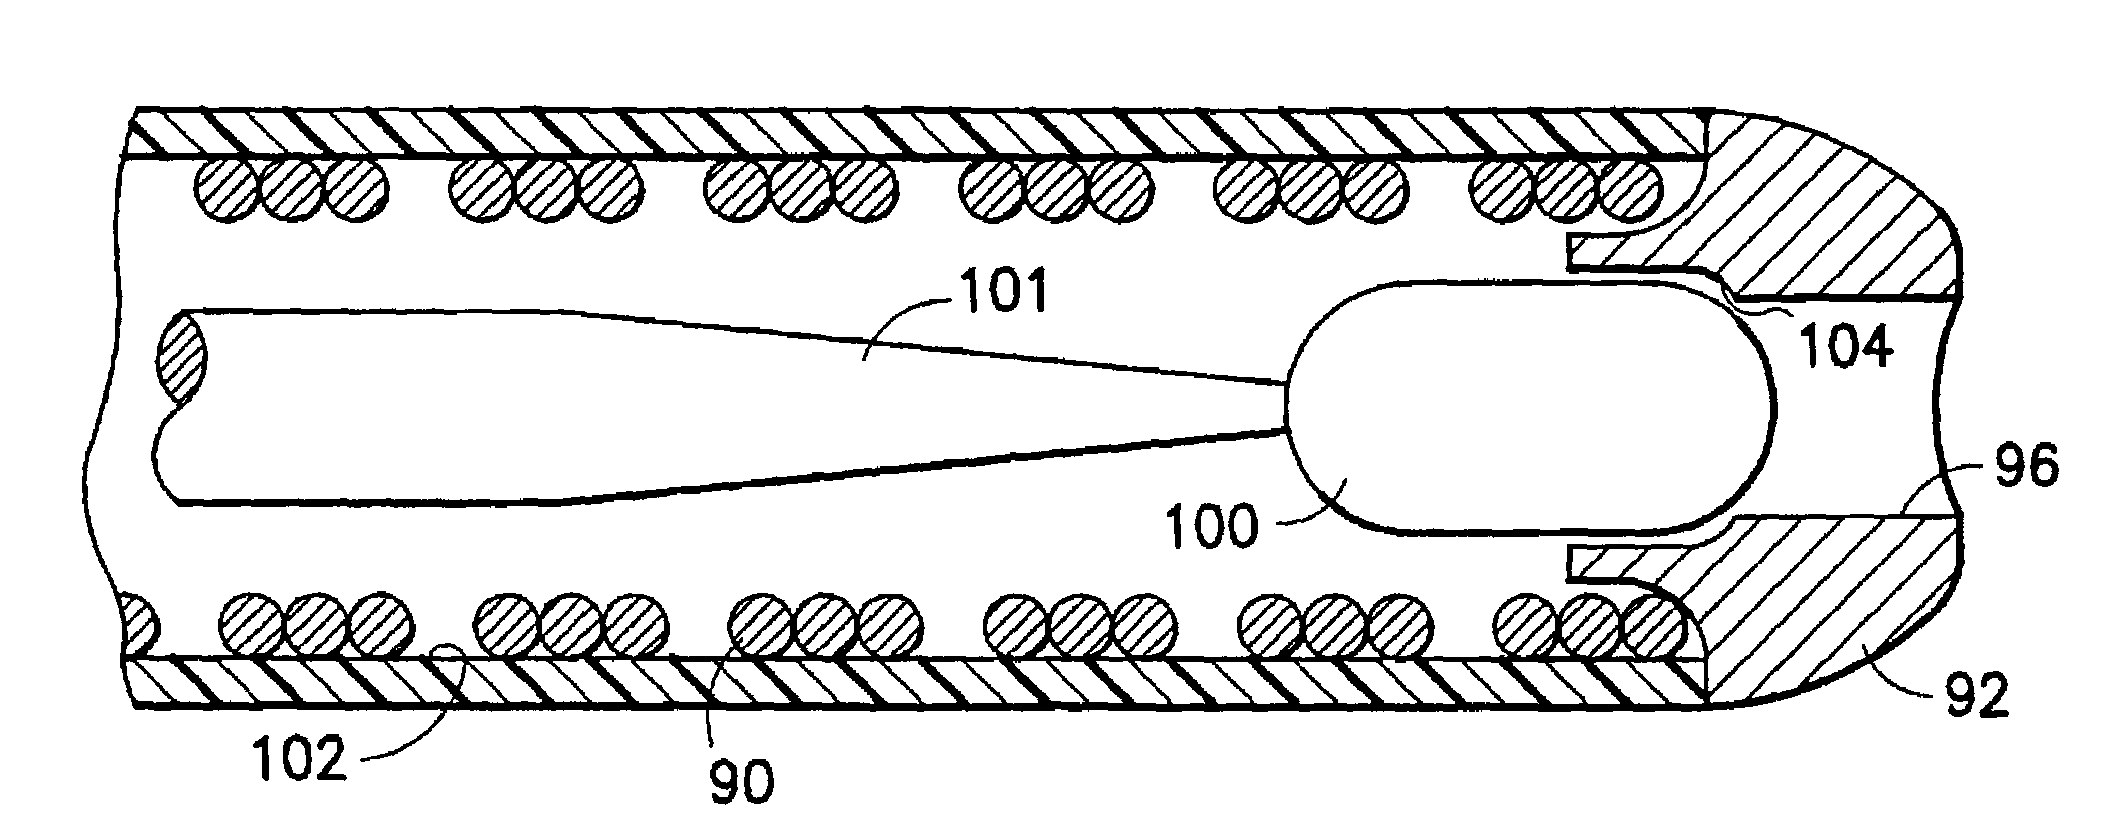 Stylet feature for resisting perforation of an implantable lead